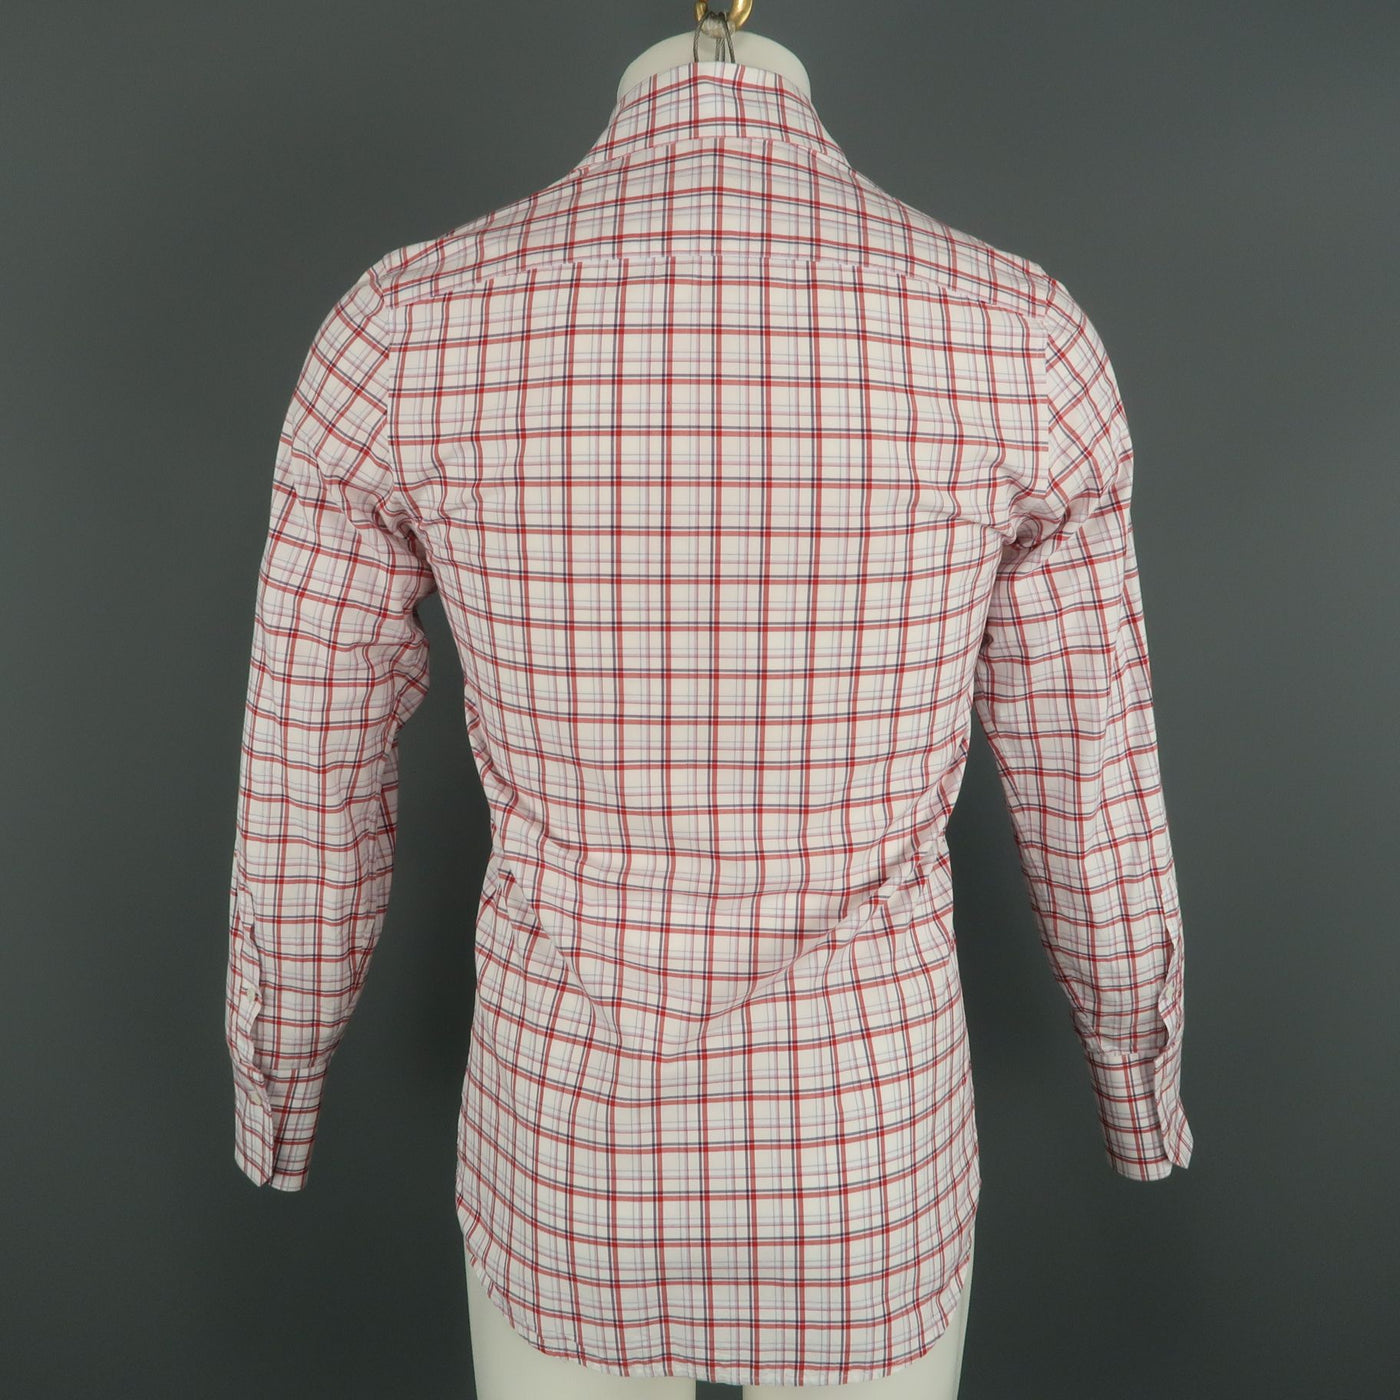 GUCCI Size S White & Red Plaid Cotton Button Up Long Sleeve Shirt